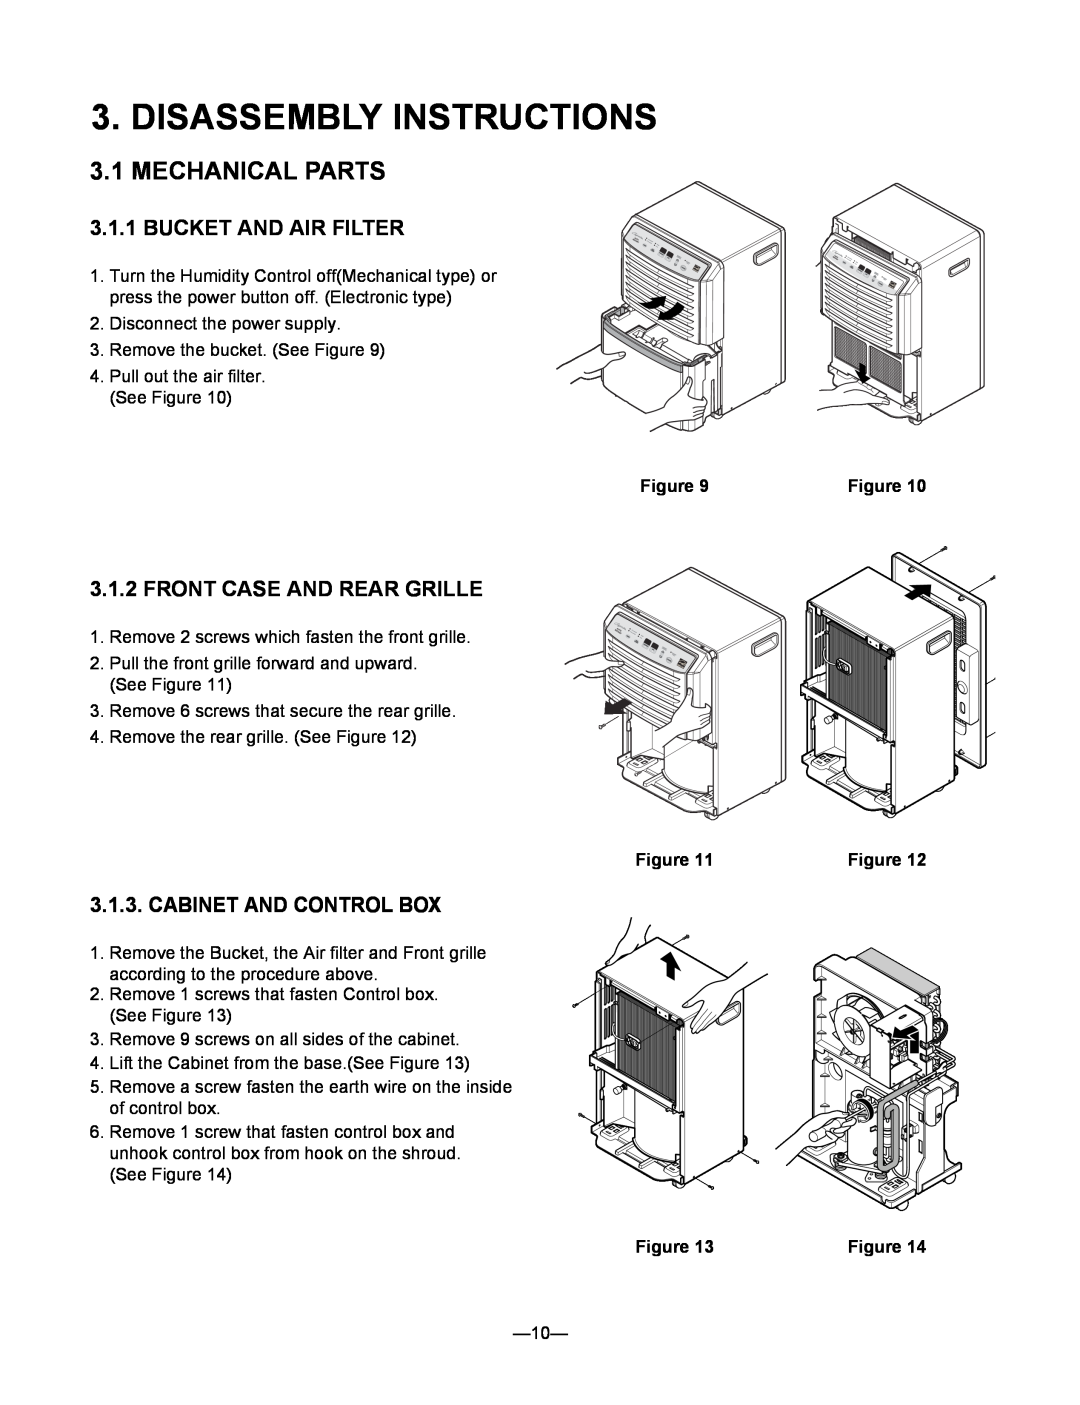 Heat Controller BHD-301-D Disassembly Instructions, Mechanical Parts, Bucket And Air Filter, Front Case And Rear Grille 